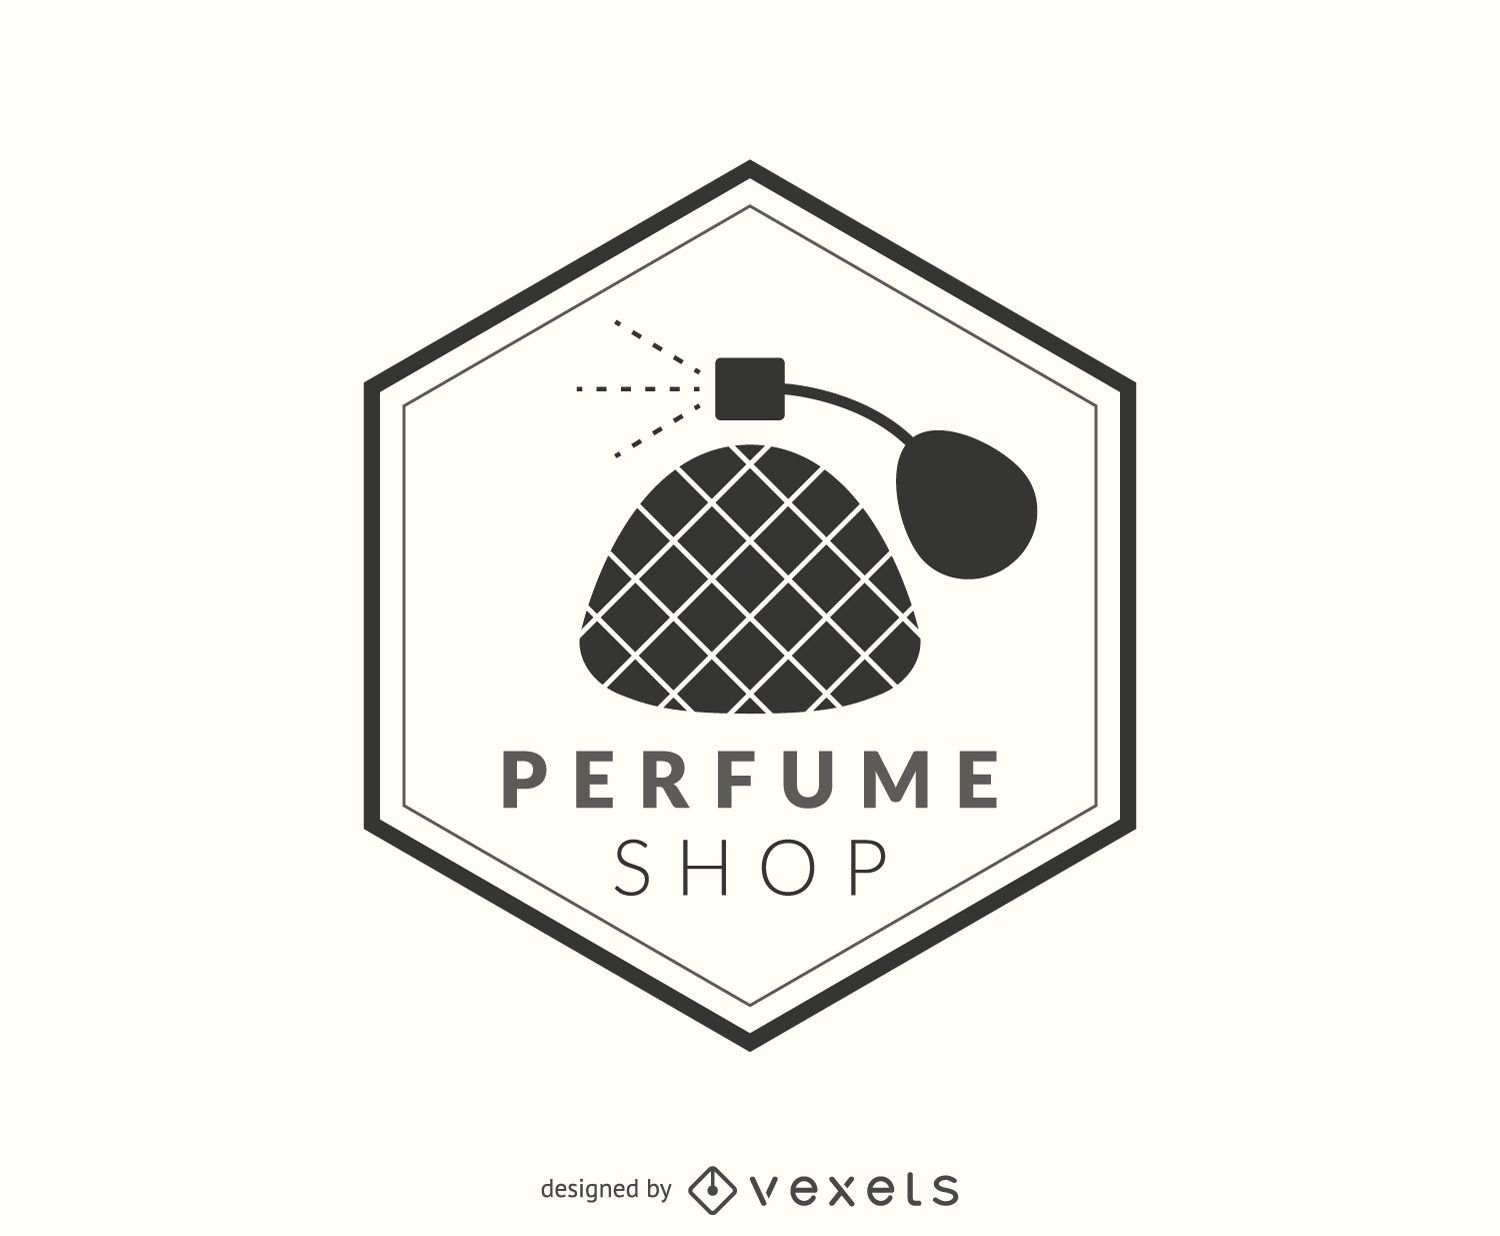 Luxury Perfume Logo - Free Vectors & PSDs to Download